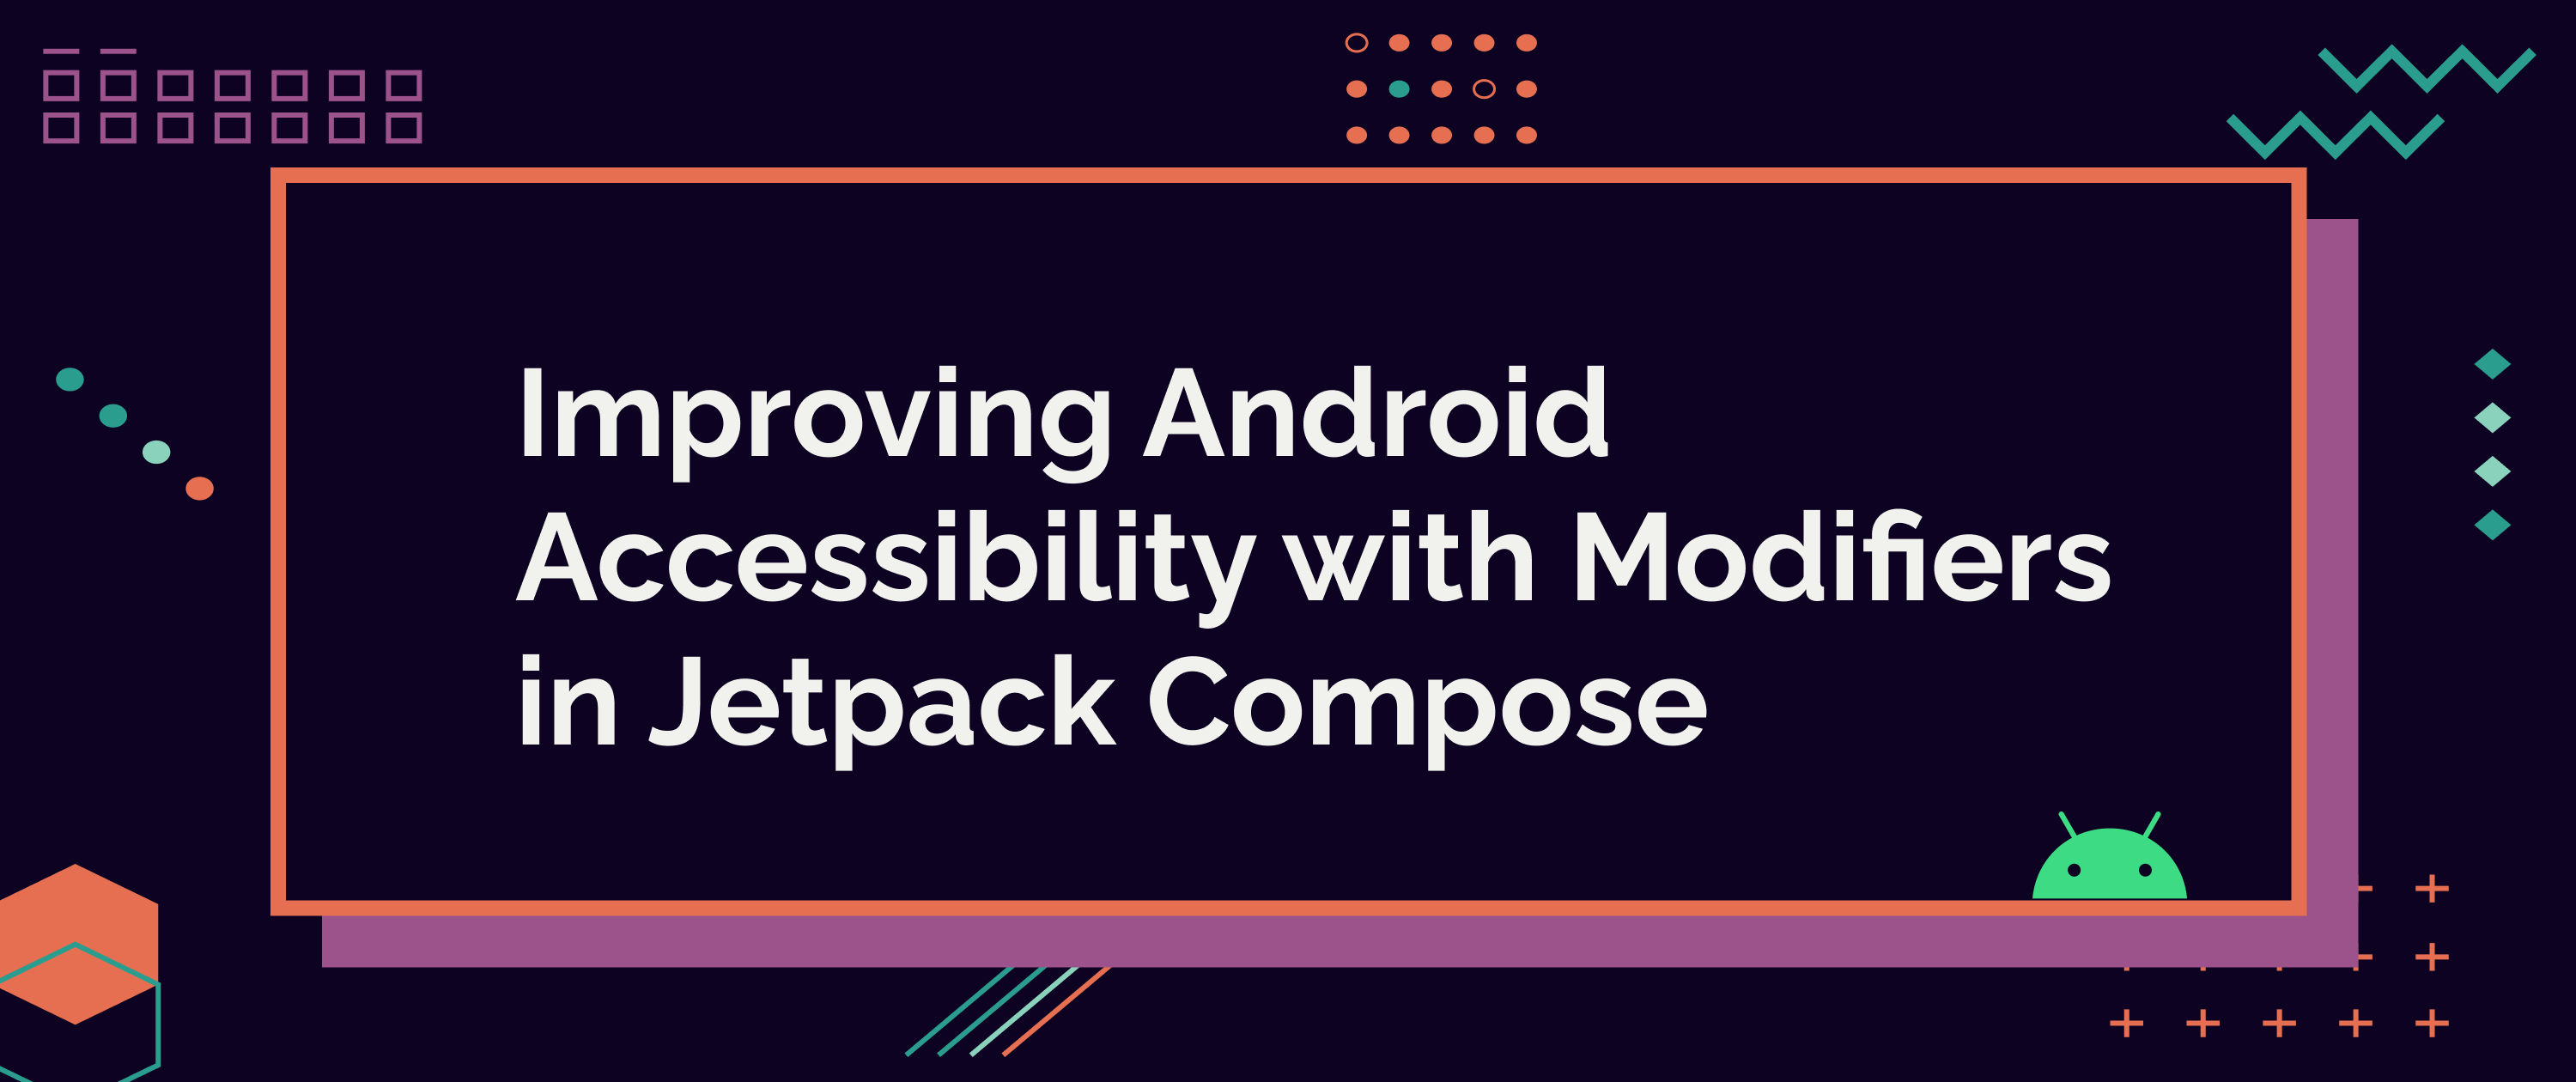 android - Jetpack Compose OutlinedTextField adds extra padding to